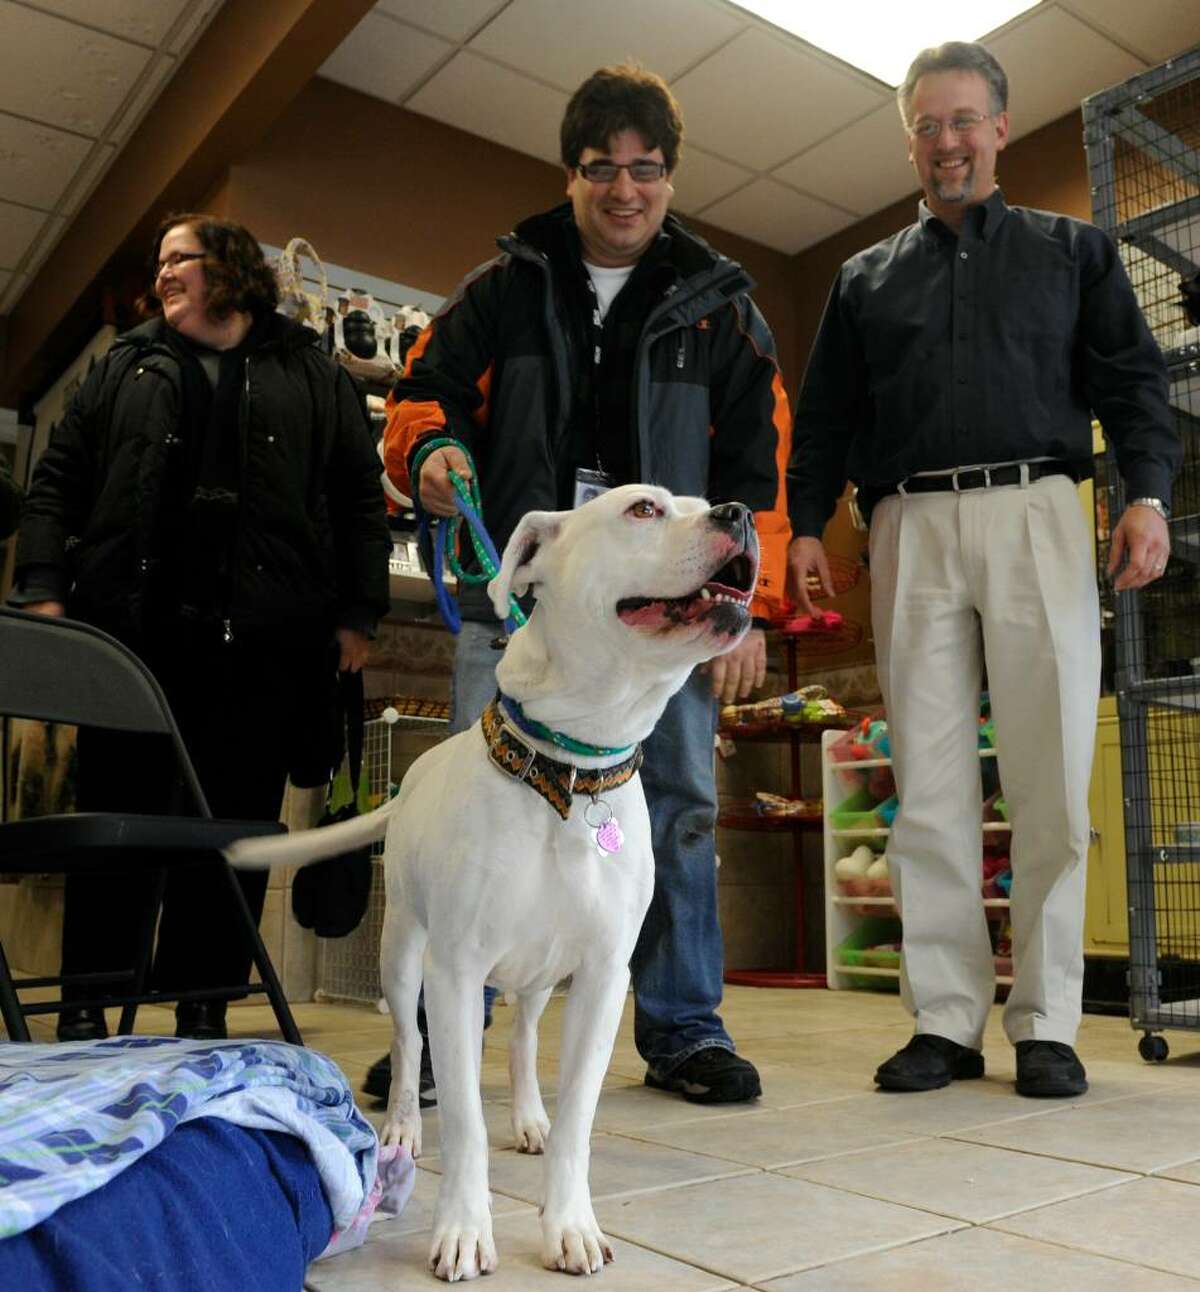 Luna, the American Bulldog Mix that has been missing from the Shaker Veterinary Hospital since Jan. 2, was found in good health today. Here, she greets reporters during a visit with her owners, Shelley and Ralph Rataul. (Skip Dickstein/ Times Union)